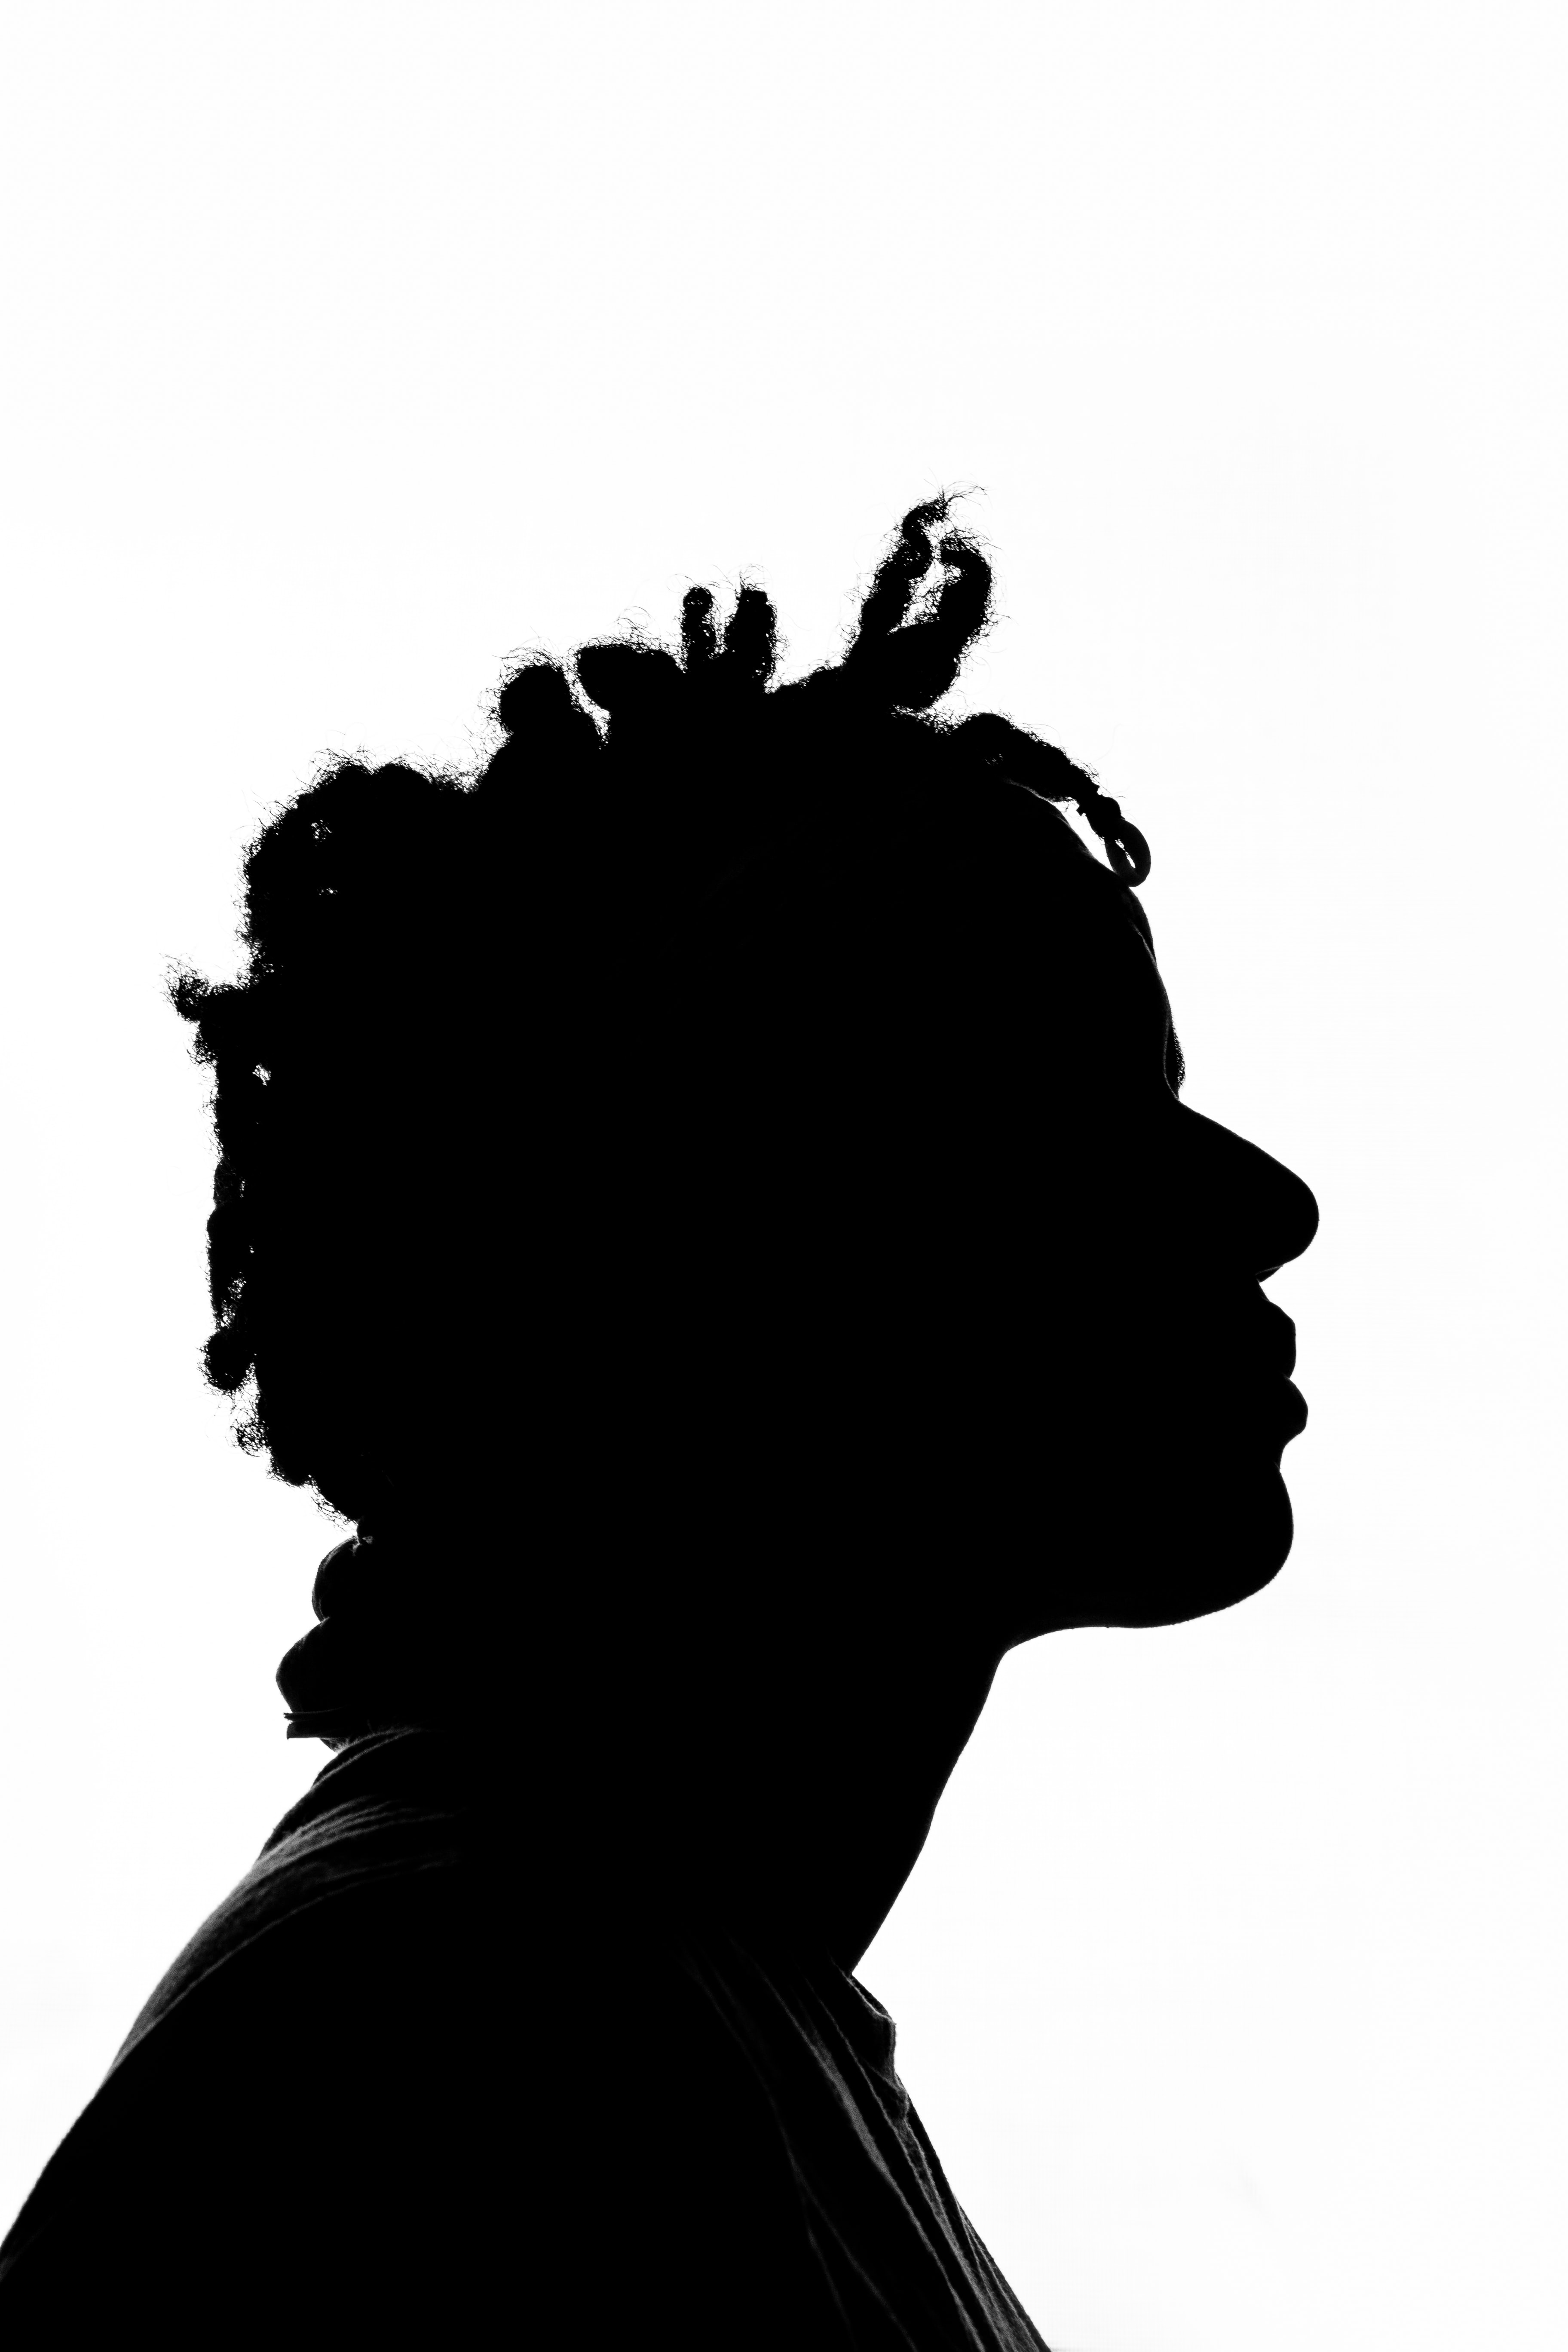 The profile of a person whose hair texture reveals that they are Black